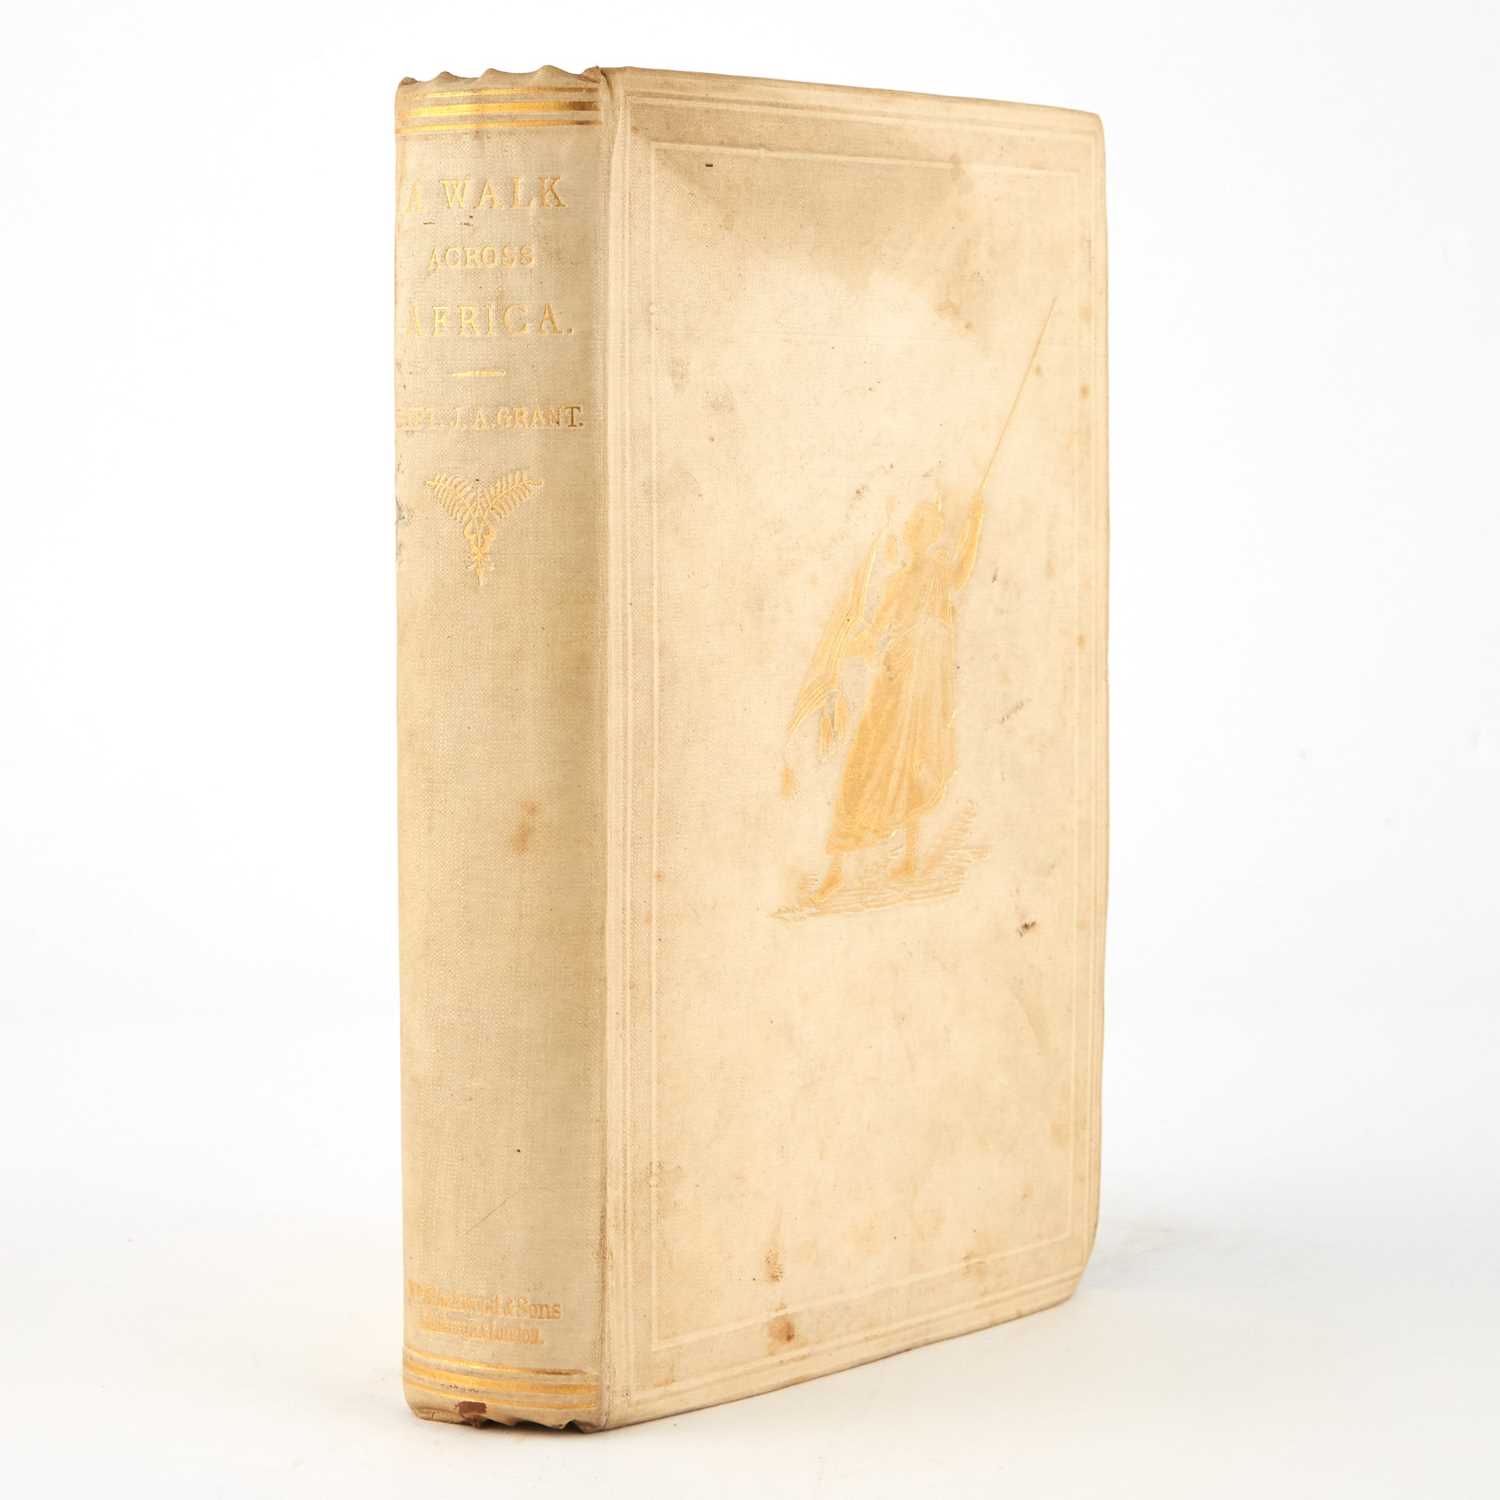 Lot 165 - Grant's A Walk Across Africa, presentation copy to his mother of the first edition